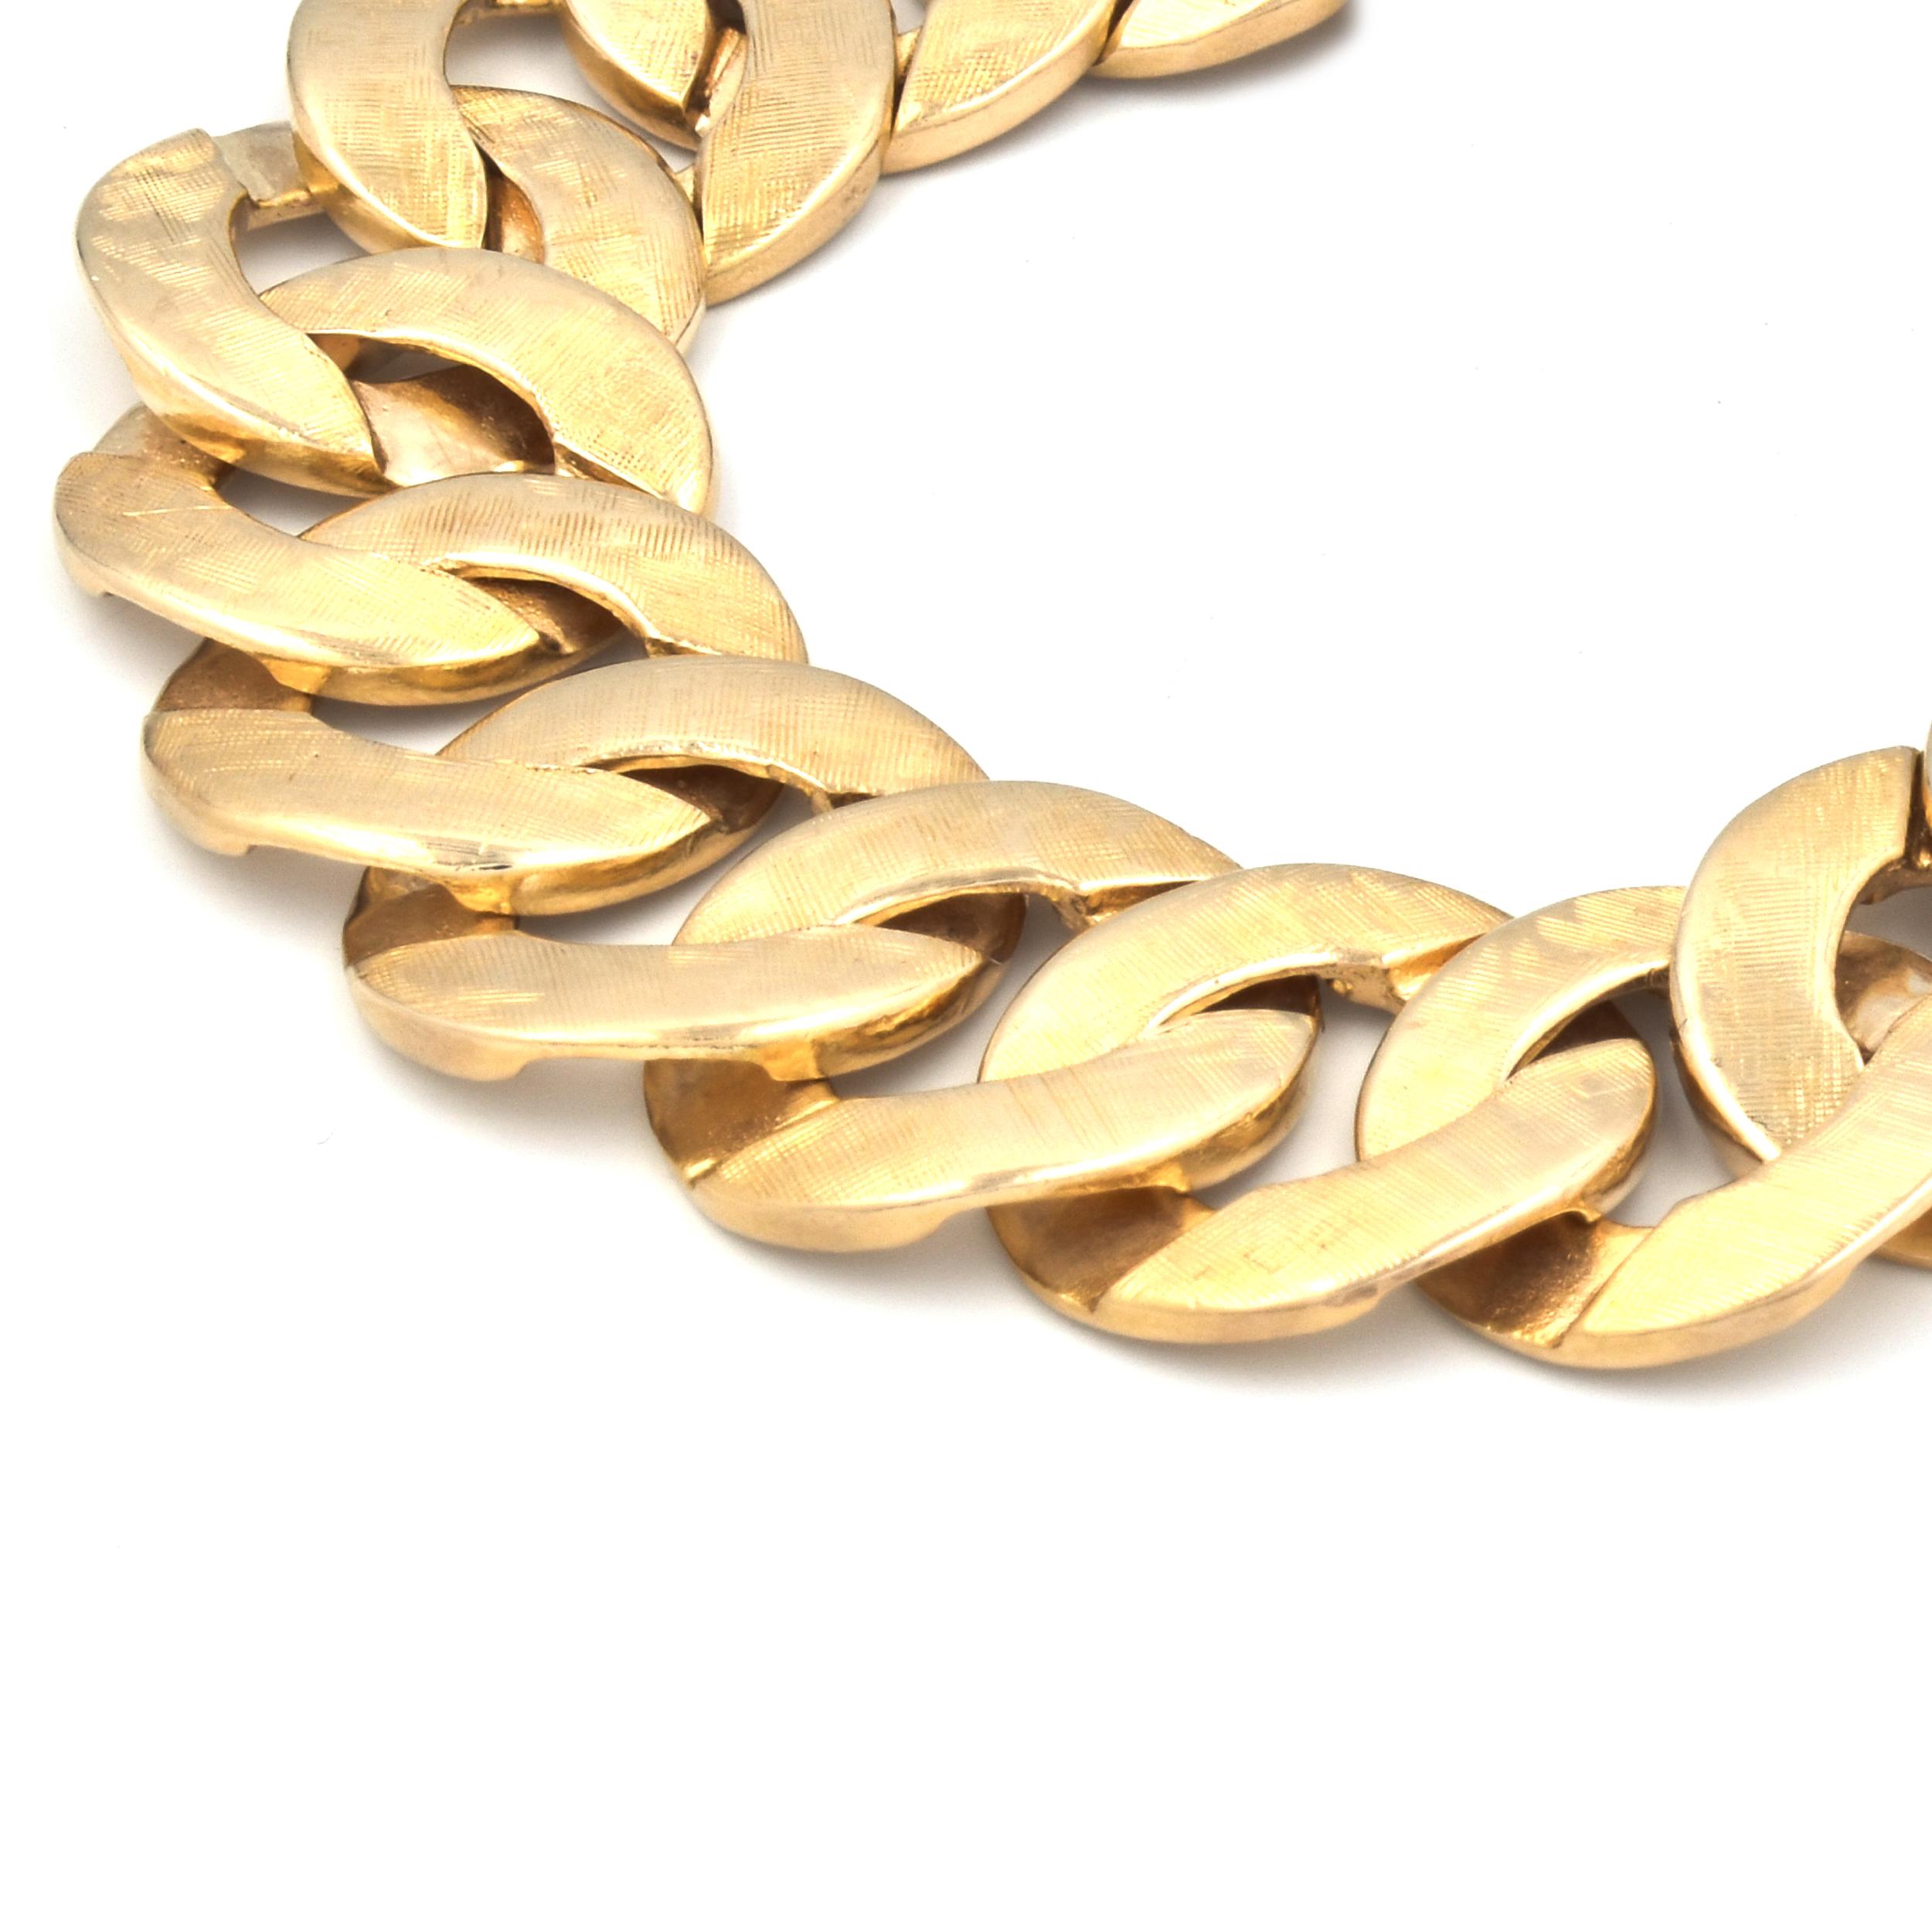 Designer: custom
Material: 14K yellow gold 
Dimensions: bracelet will fit up to a 7.5-inch wrist
Weight: 59.68 grams
